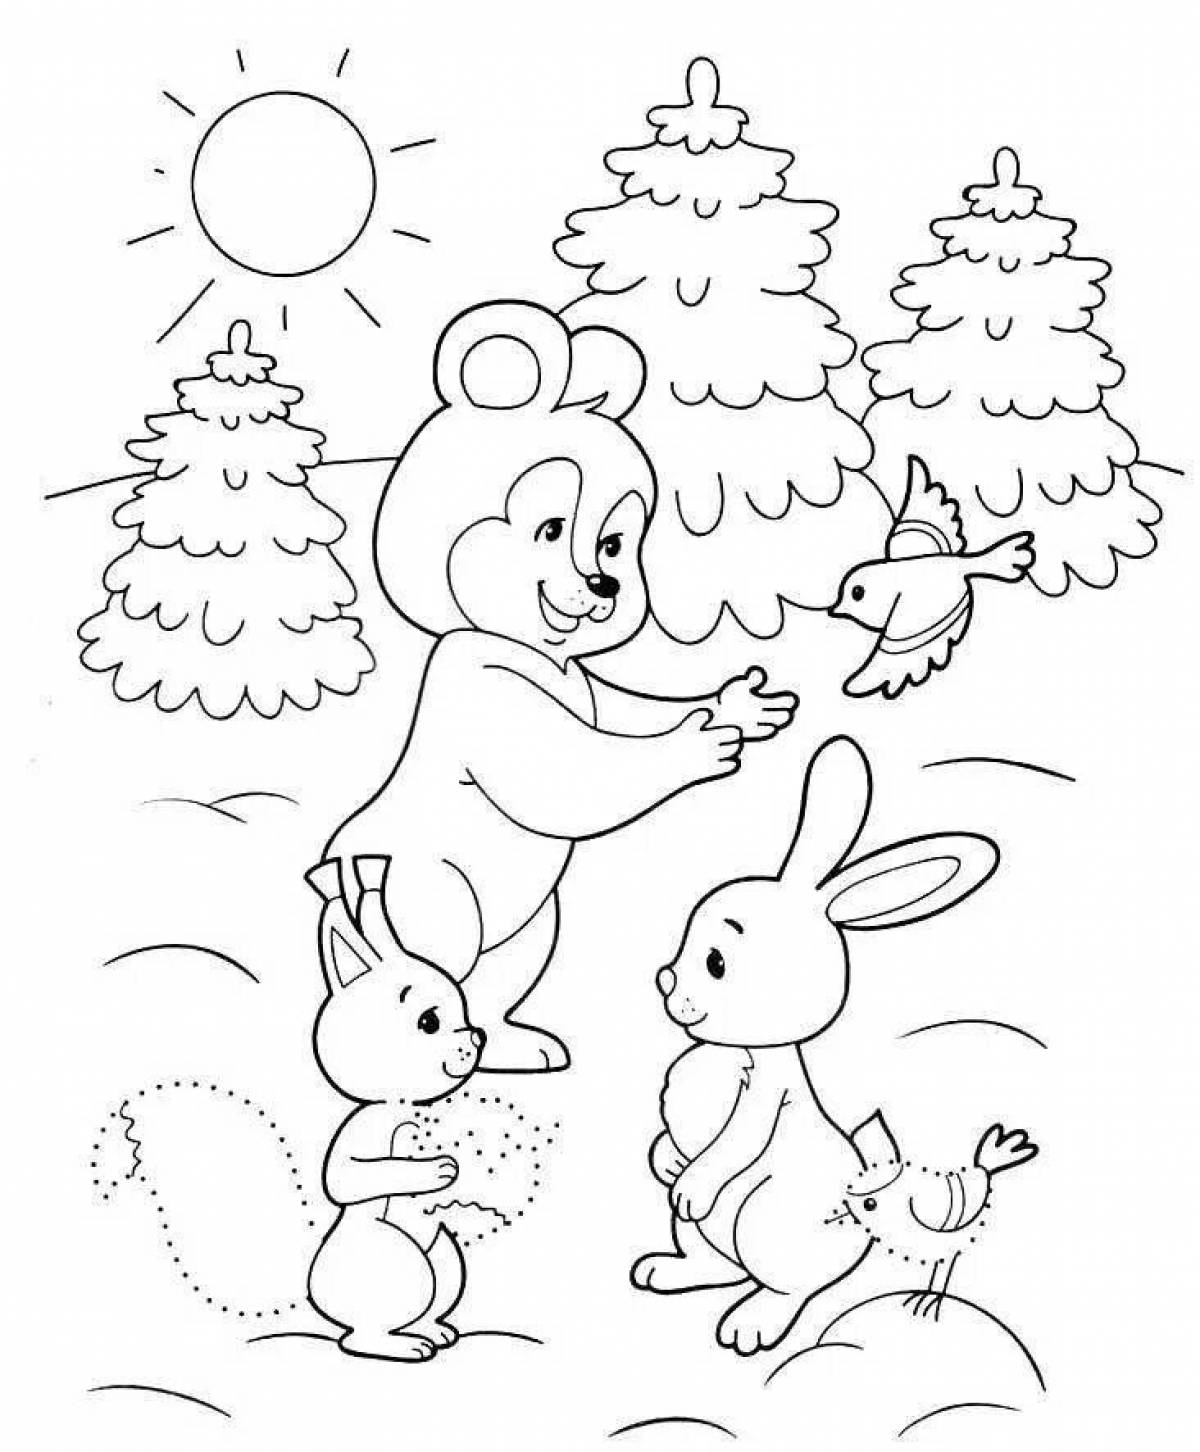 Jubilant coloring hare 2023 new year